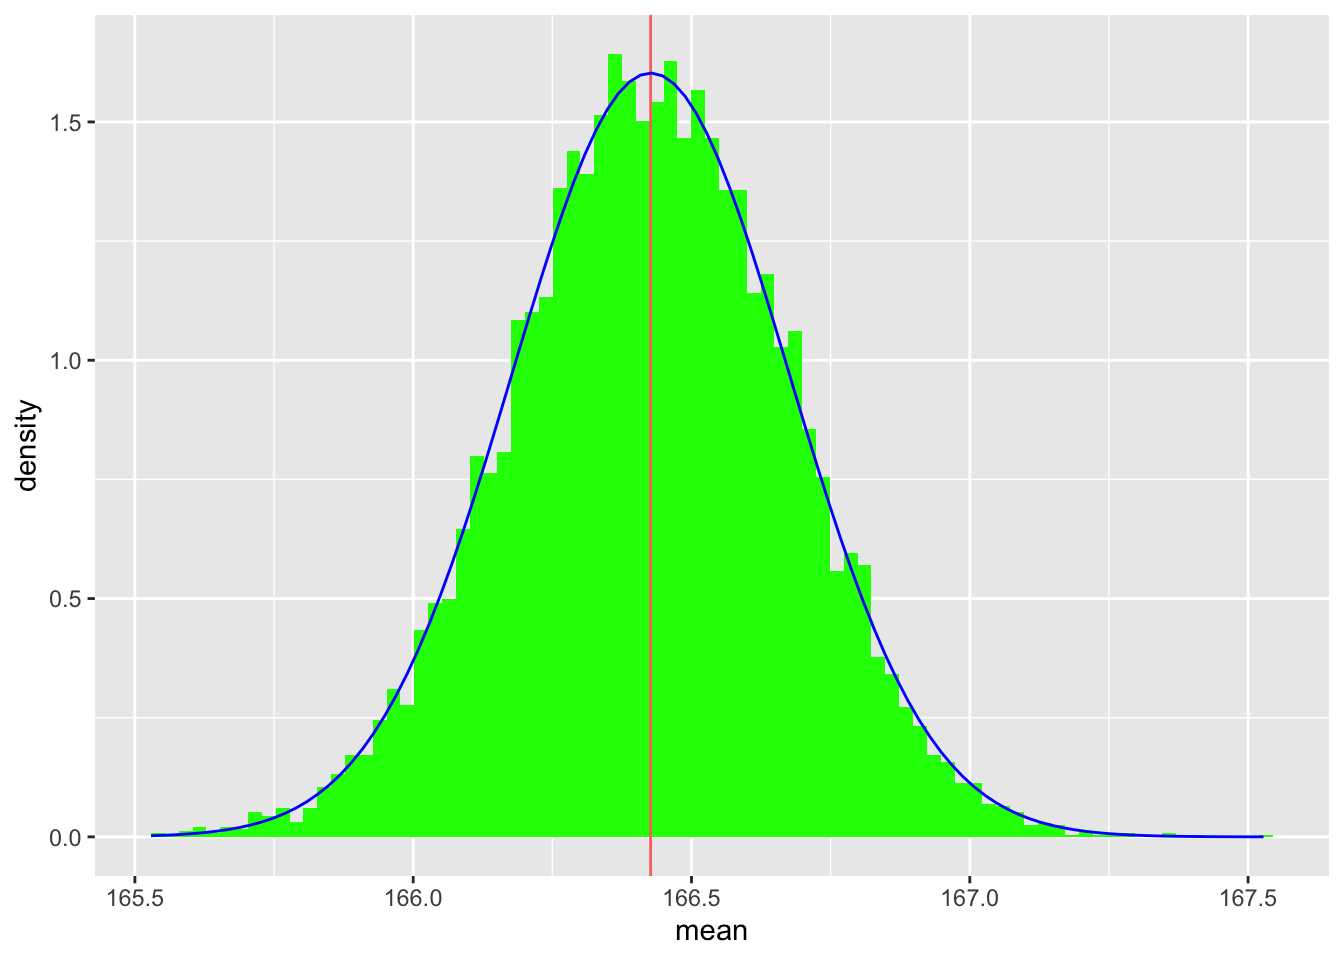 Histogram for means of bootstrapped samples of 100 drawn from a single sample of 1000 from the bimodal distribution. Histogram show an approximately normal distribution centred around 166.2 centimetres.